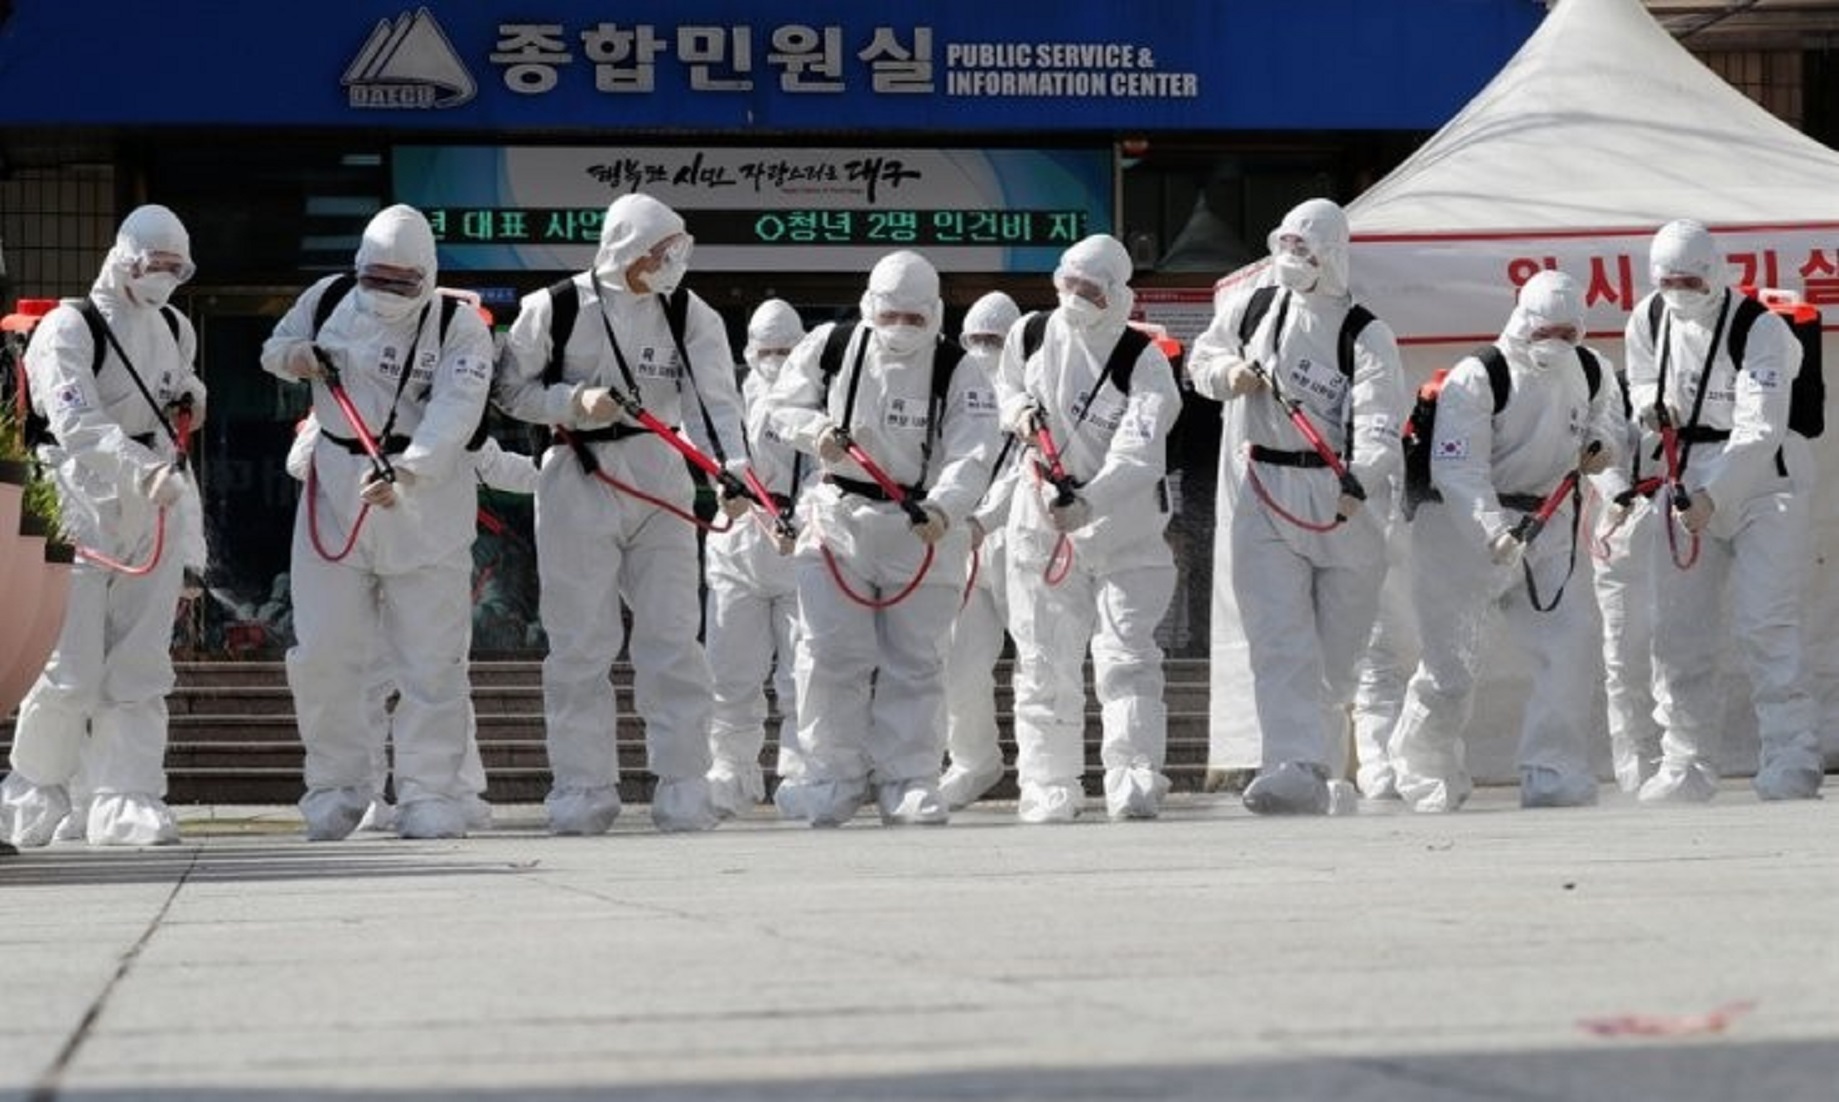 S.Korea Reports 38 More COVID-19 Cases, 23,699 In Total